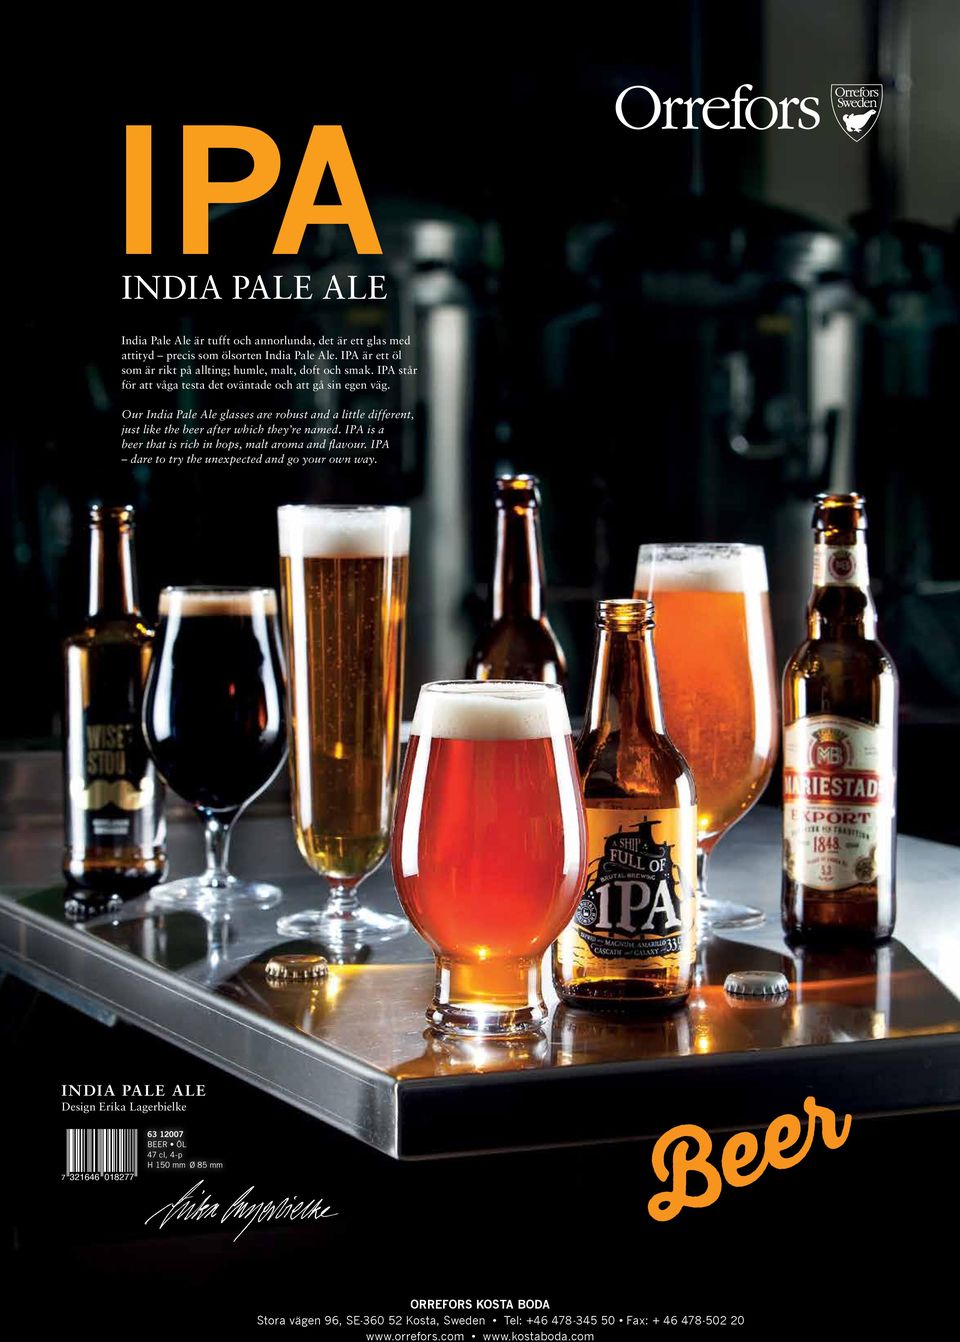 Our India Pale Ale glasses are robust and a little different, just like the beer after which they re named. IPA is a beer that is rich in hops, malt aroma and flavour.